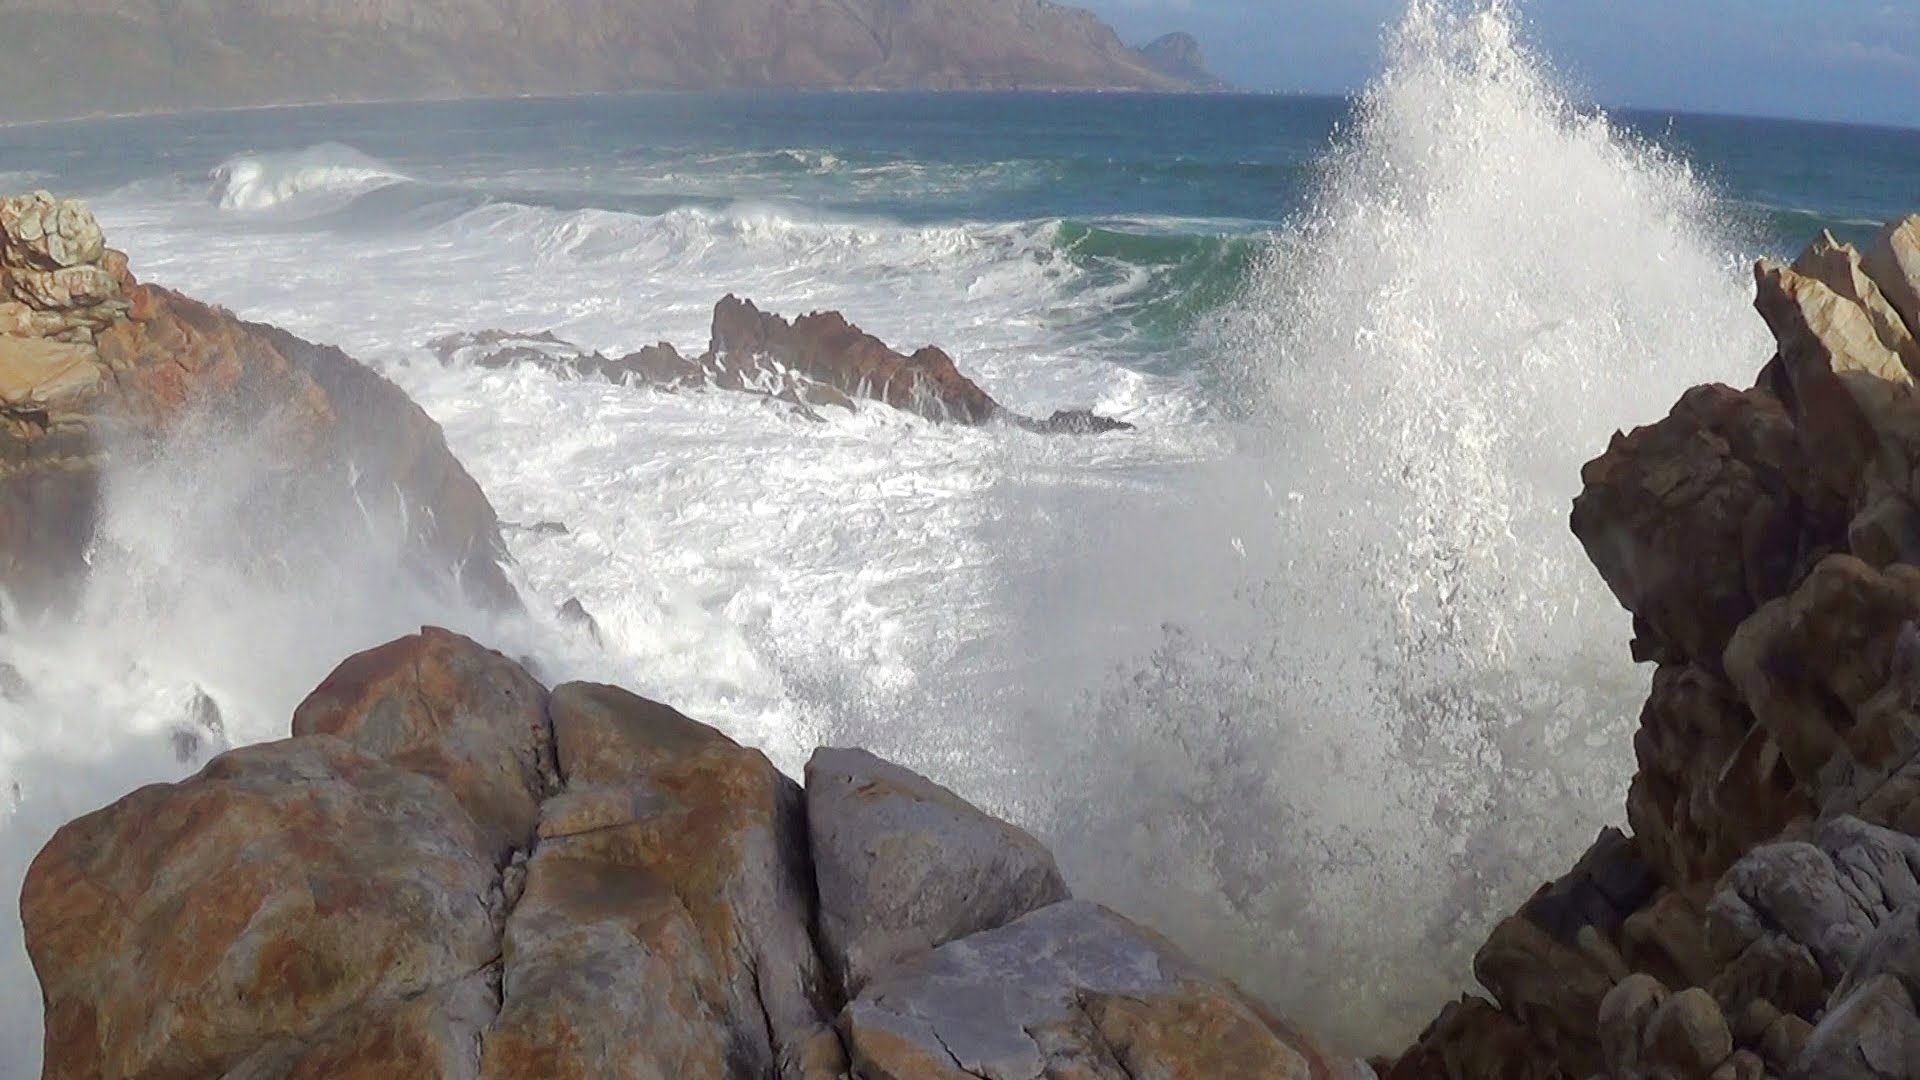 1 hour video of big ocean waves crashing into rocky shore - natural ...